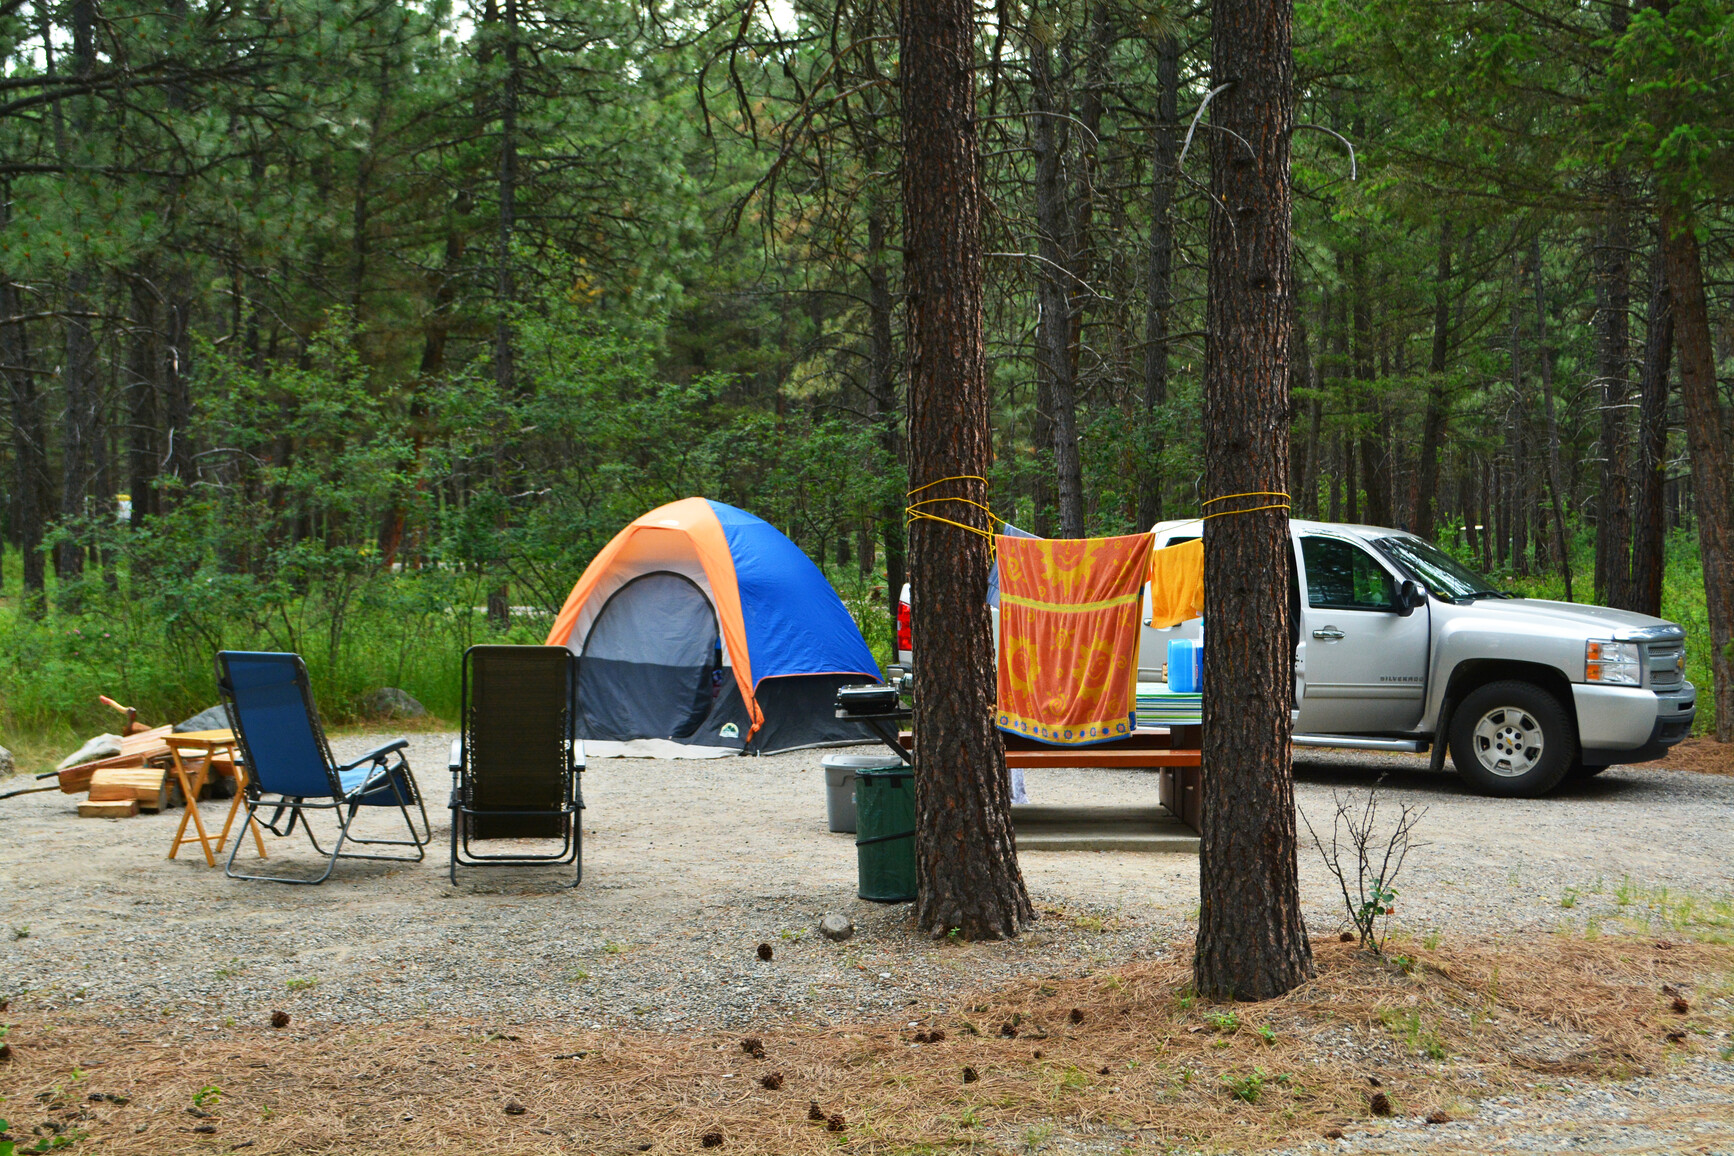 Campsite with a tent. The campground is in the forest.